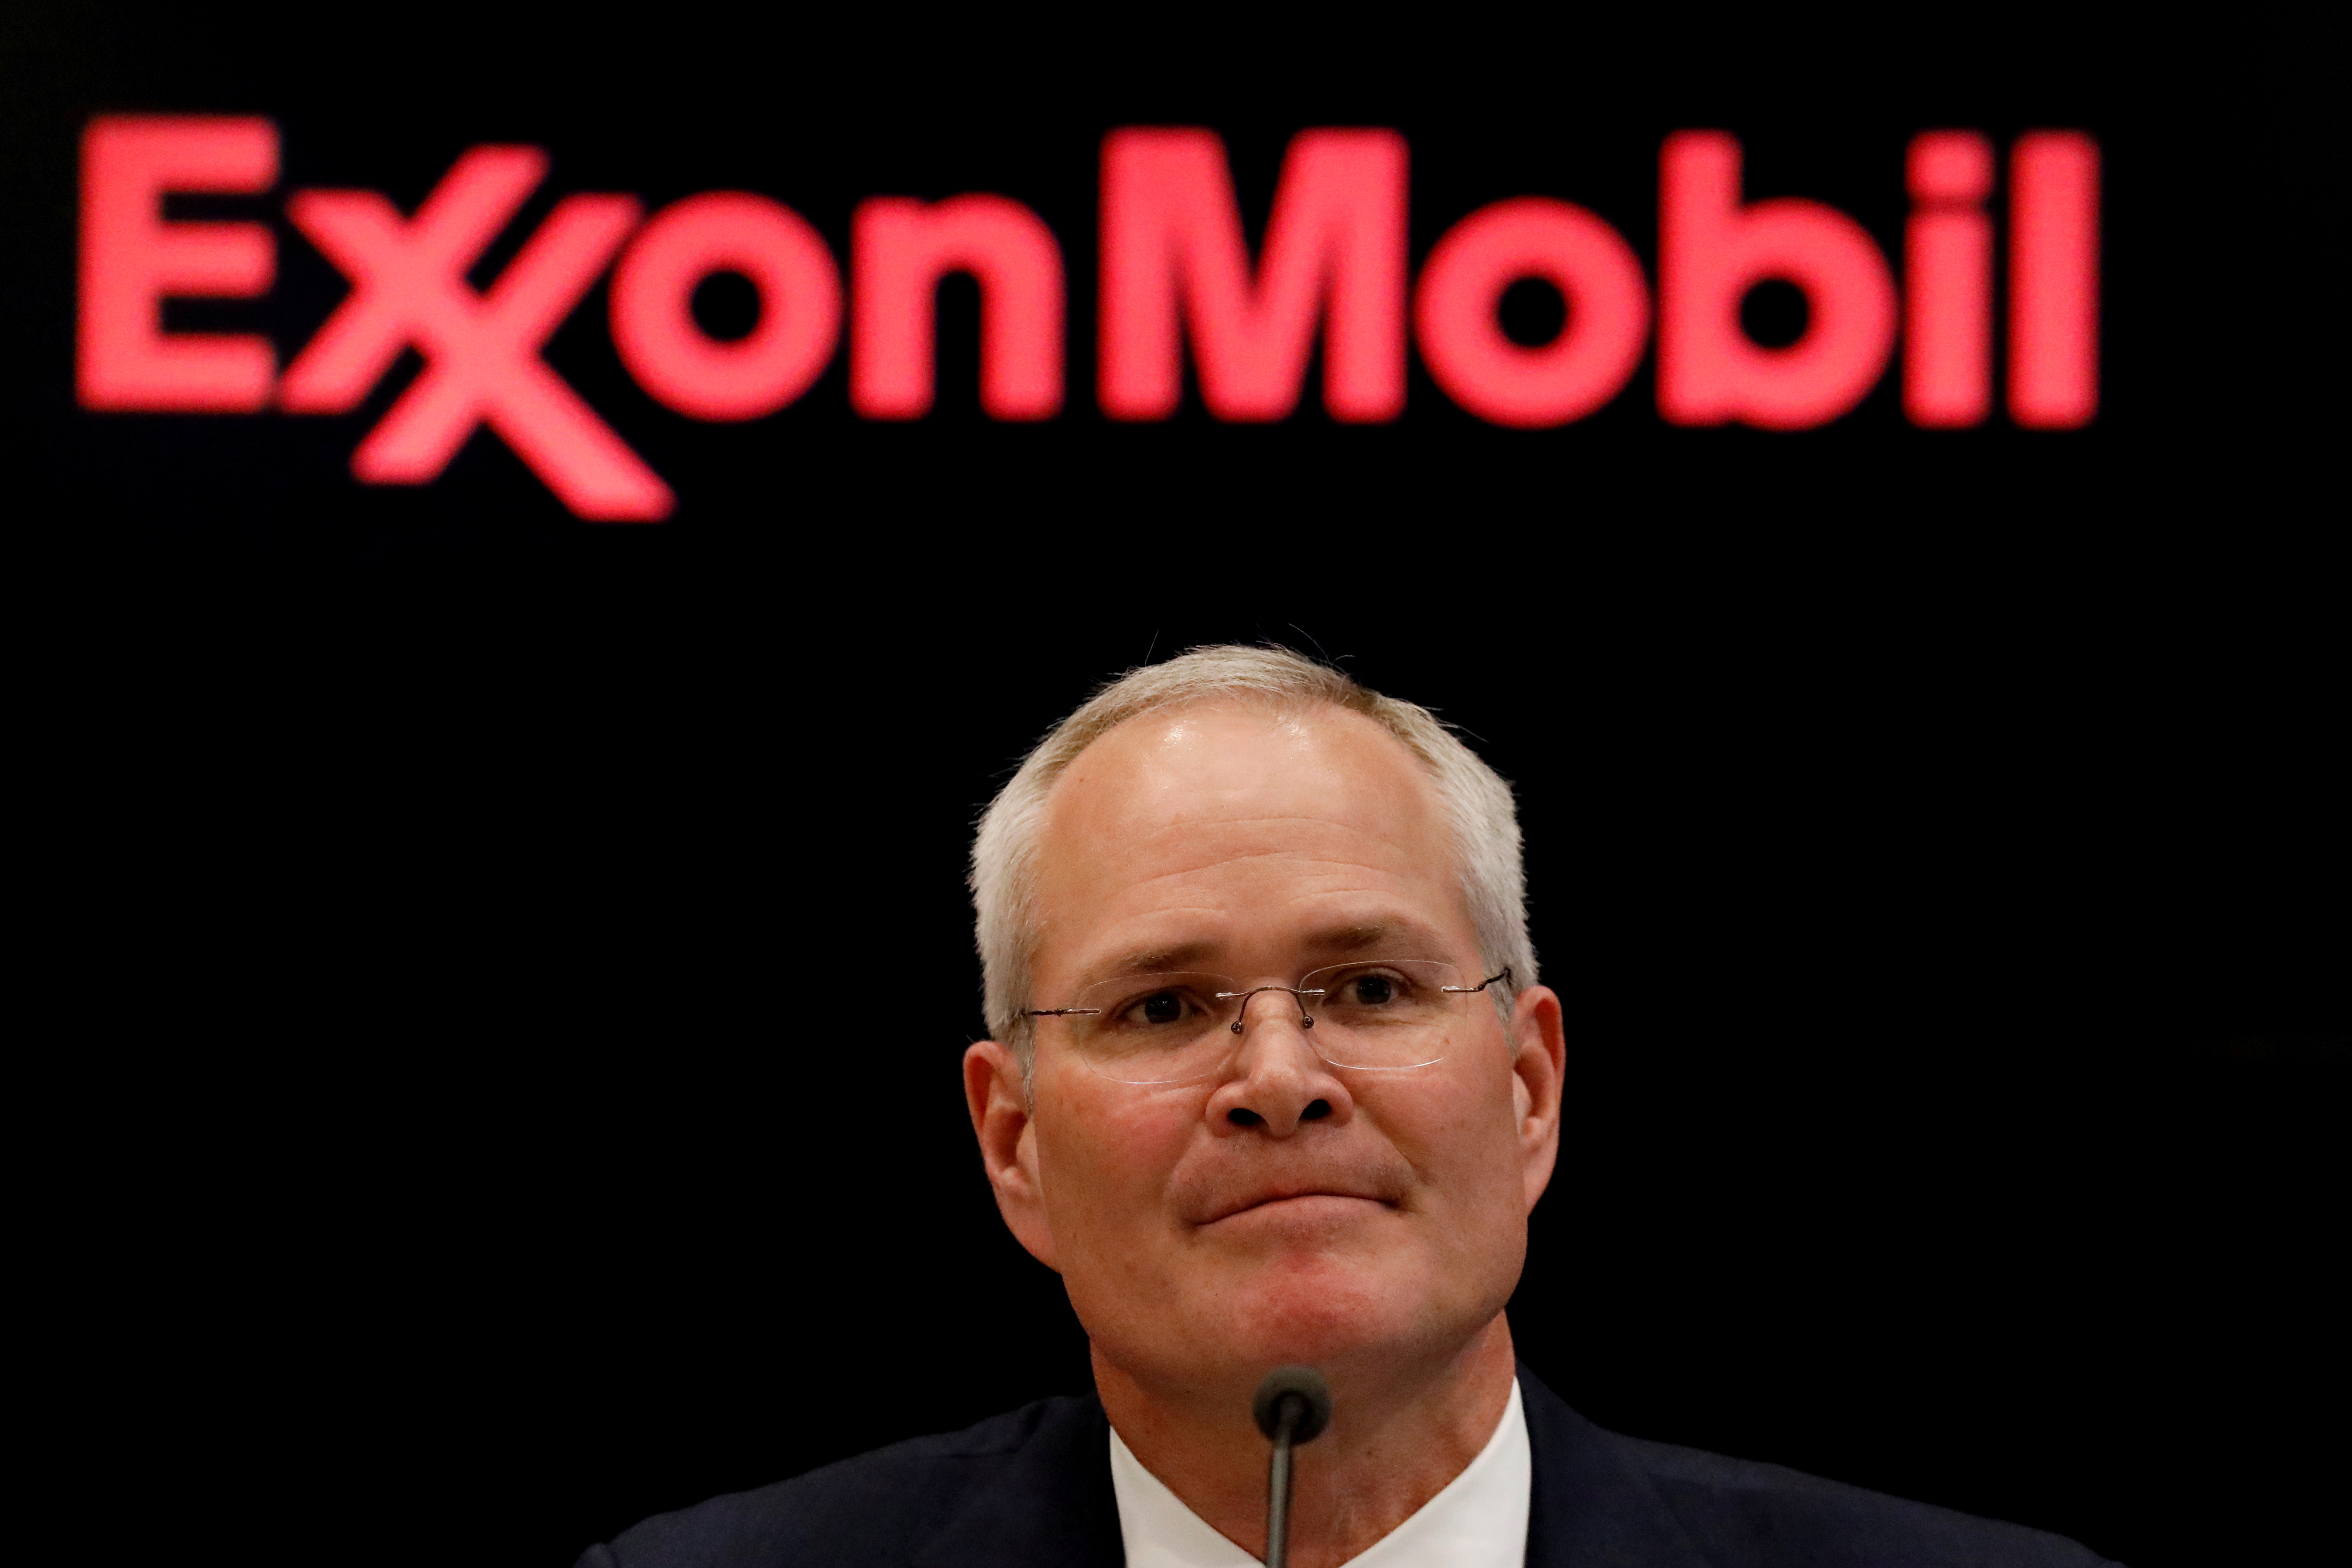 uFILE PHOTO: Darren Woods, Chairman & CEO, Exxon Mobil Corporation attends a news conference at the NYSE